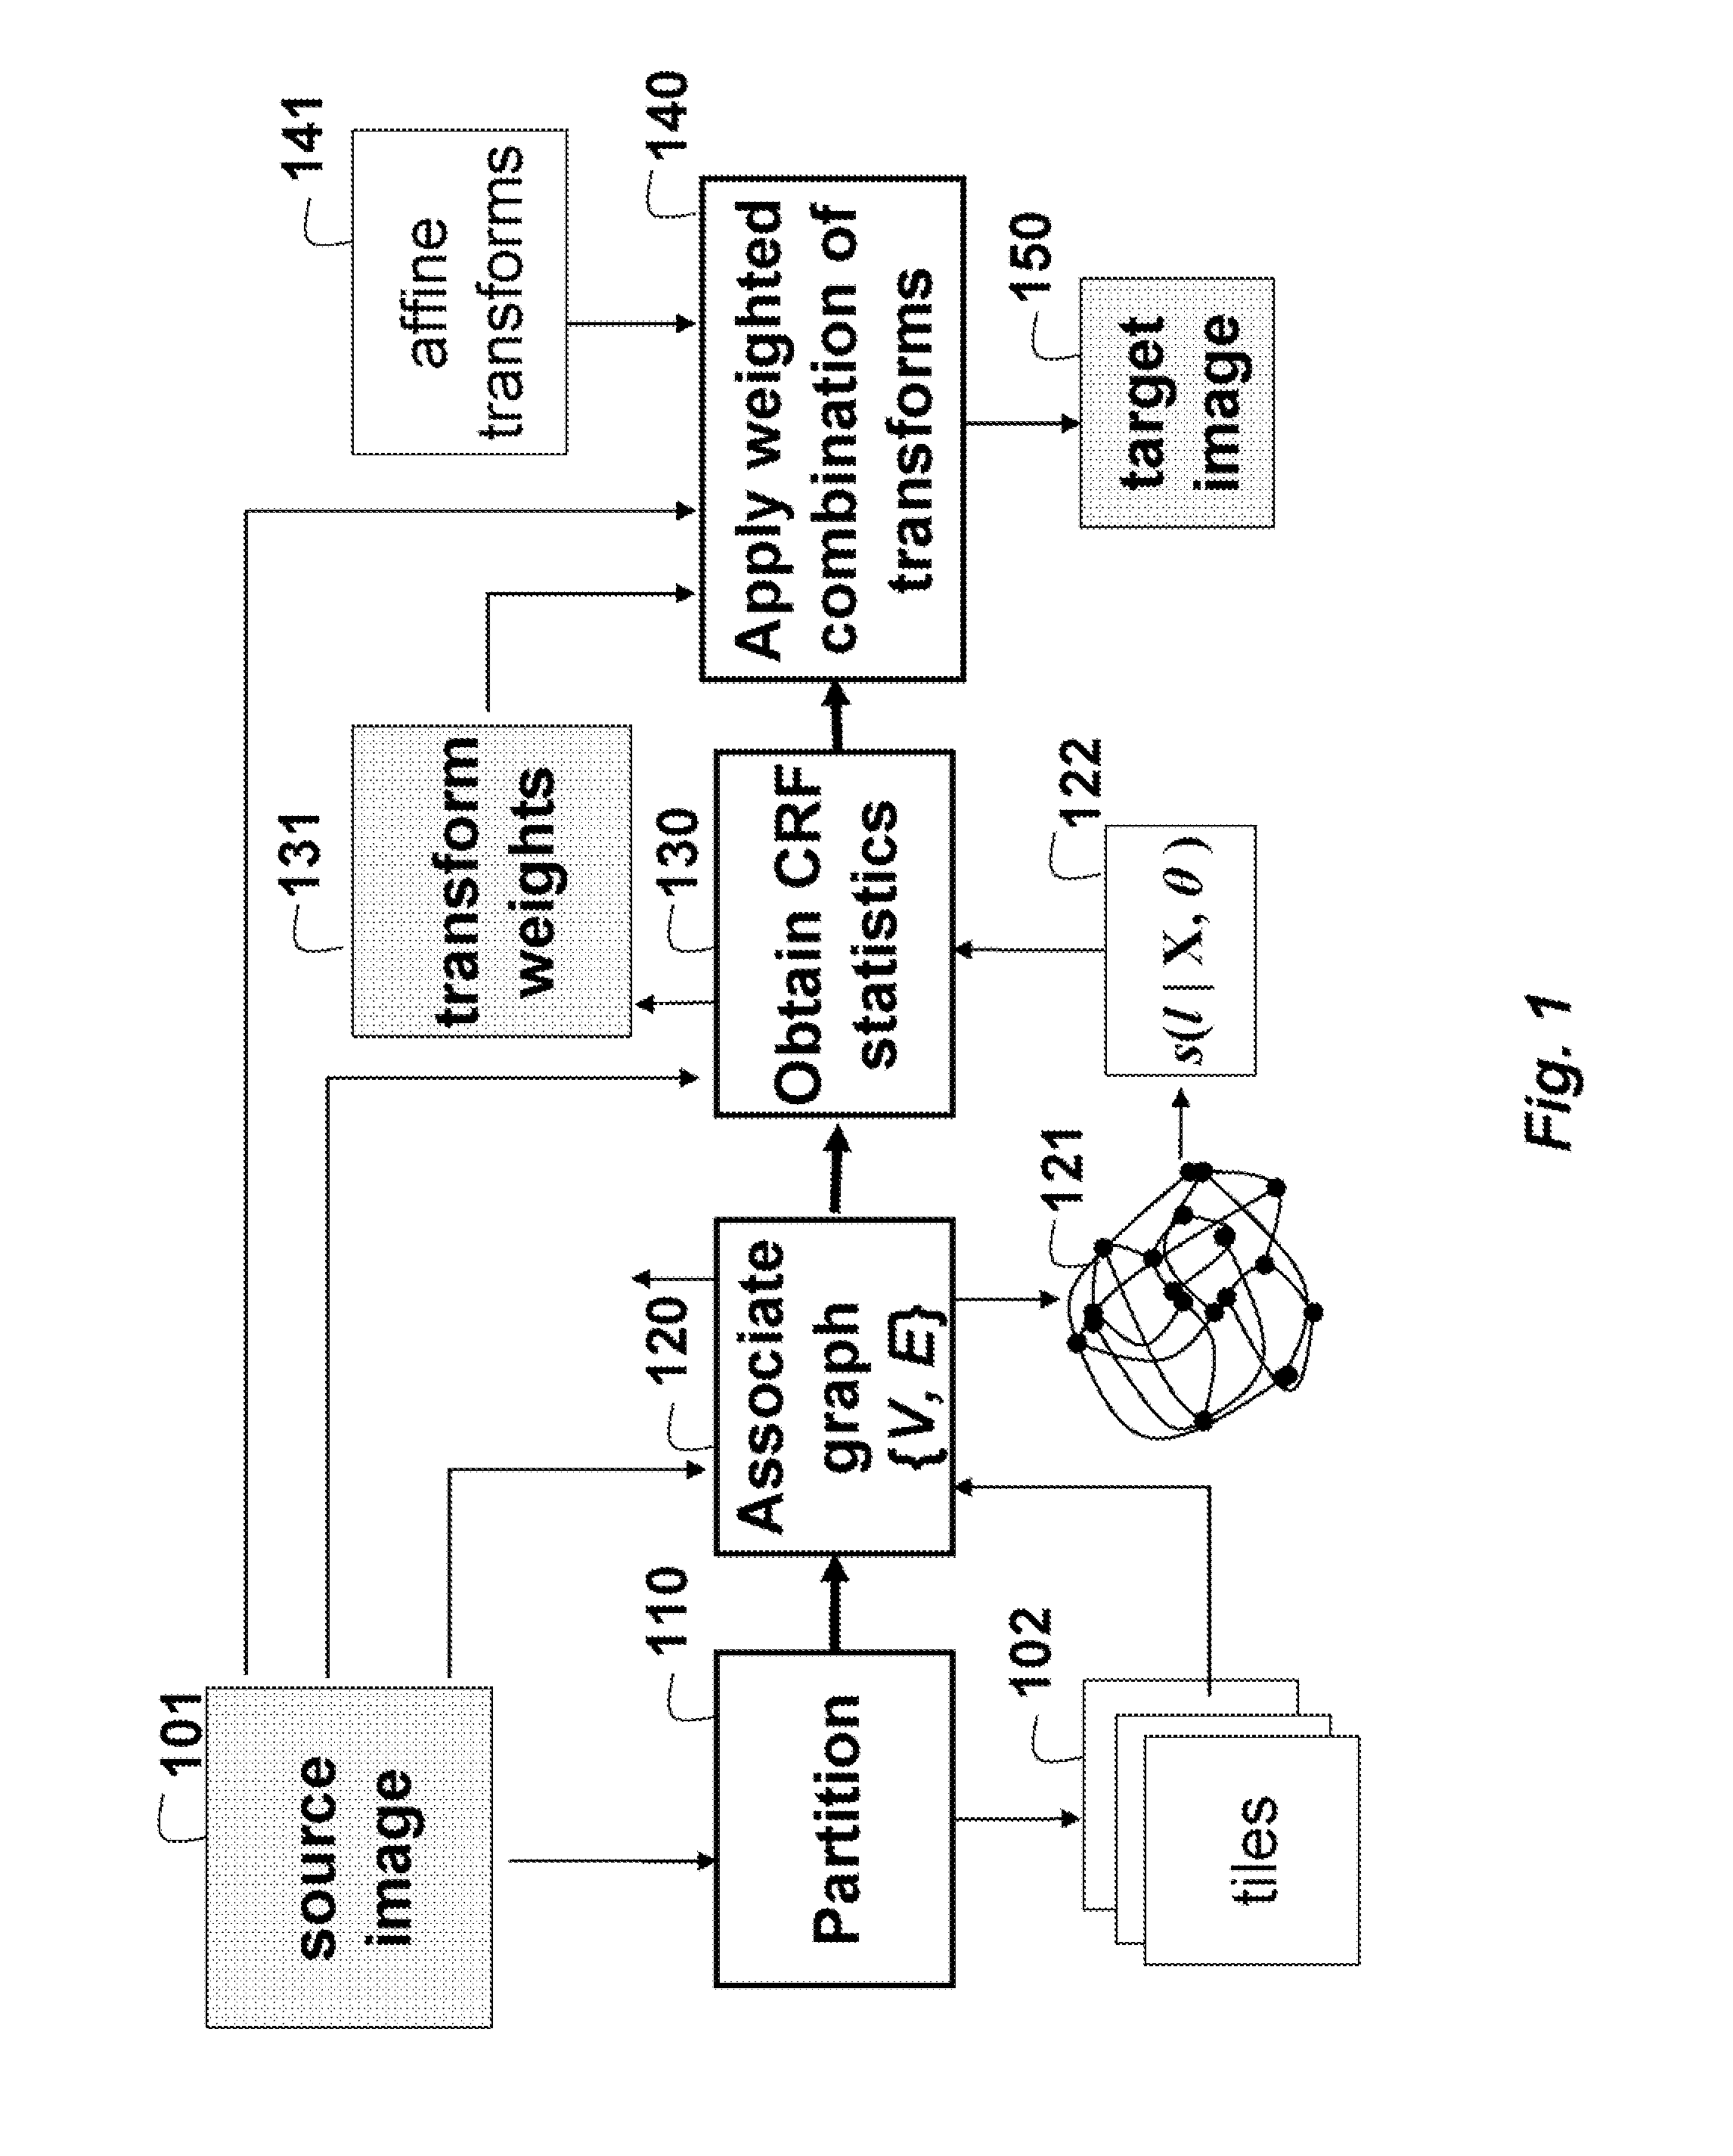 Method and apparatus for touching-up images